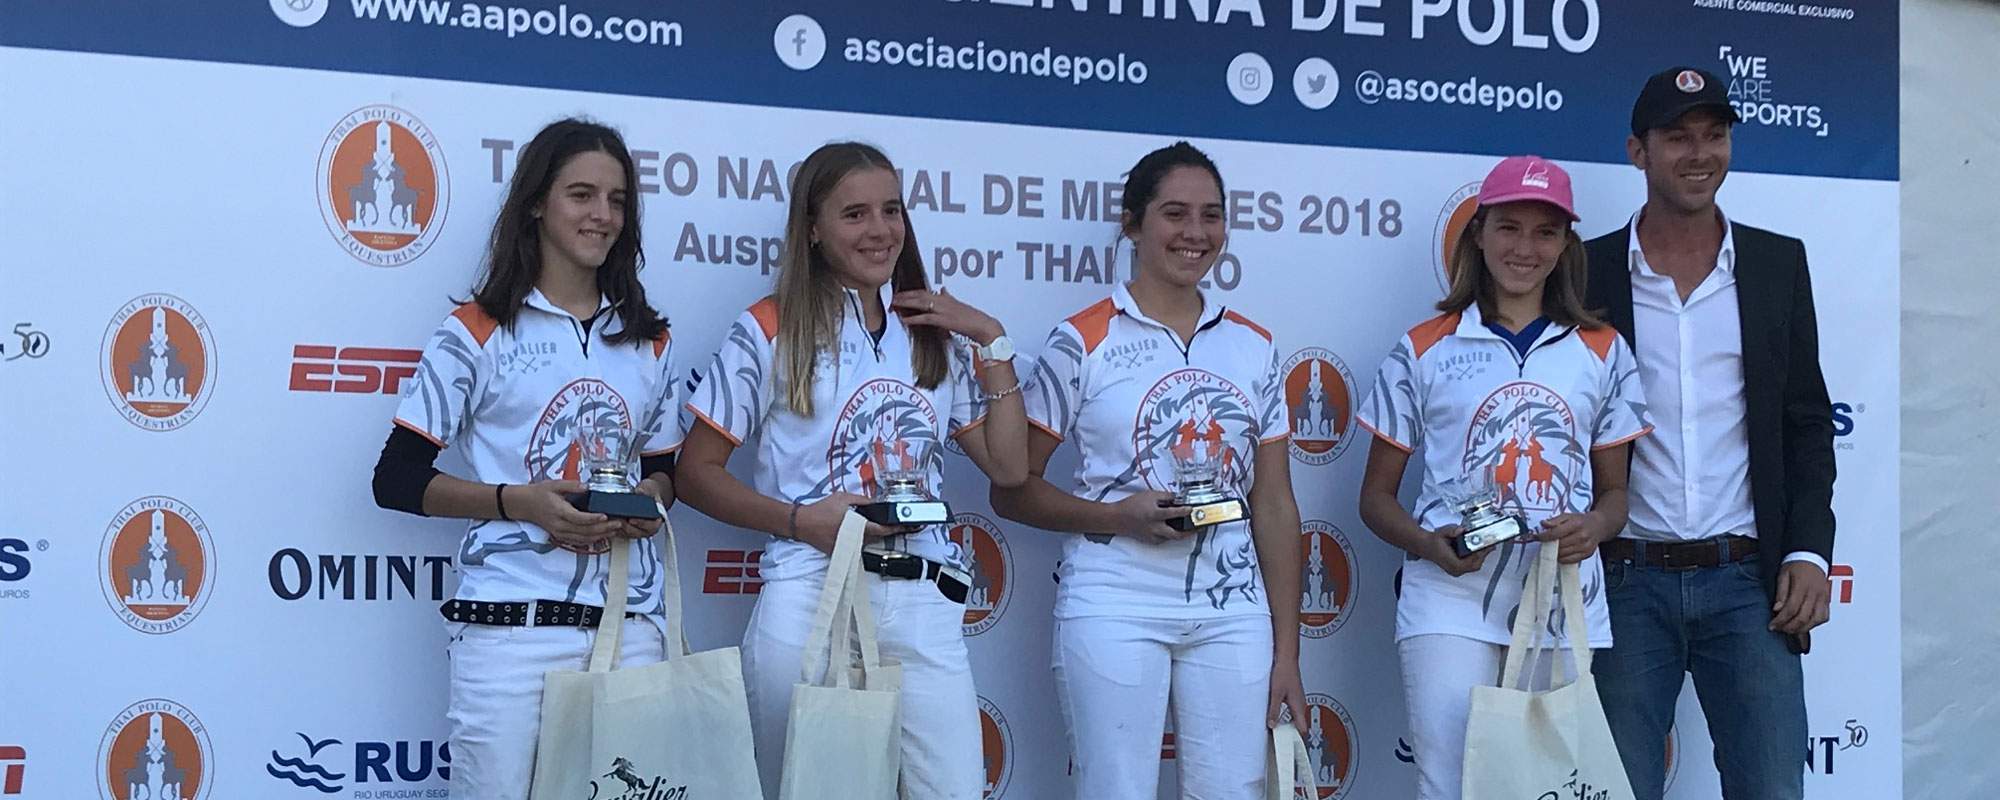 THE SOFIA QUATRO VIENTOS winner of the AAP National Youth Championship 2018 - Category Juvenile Female